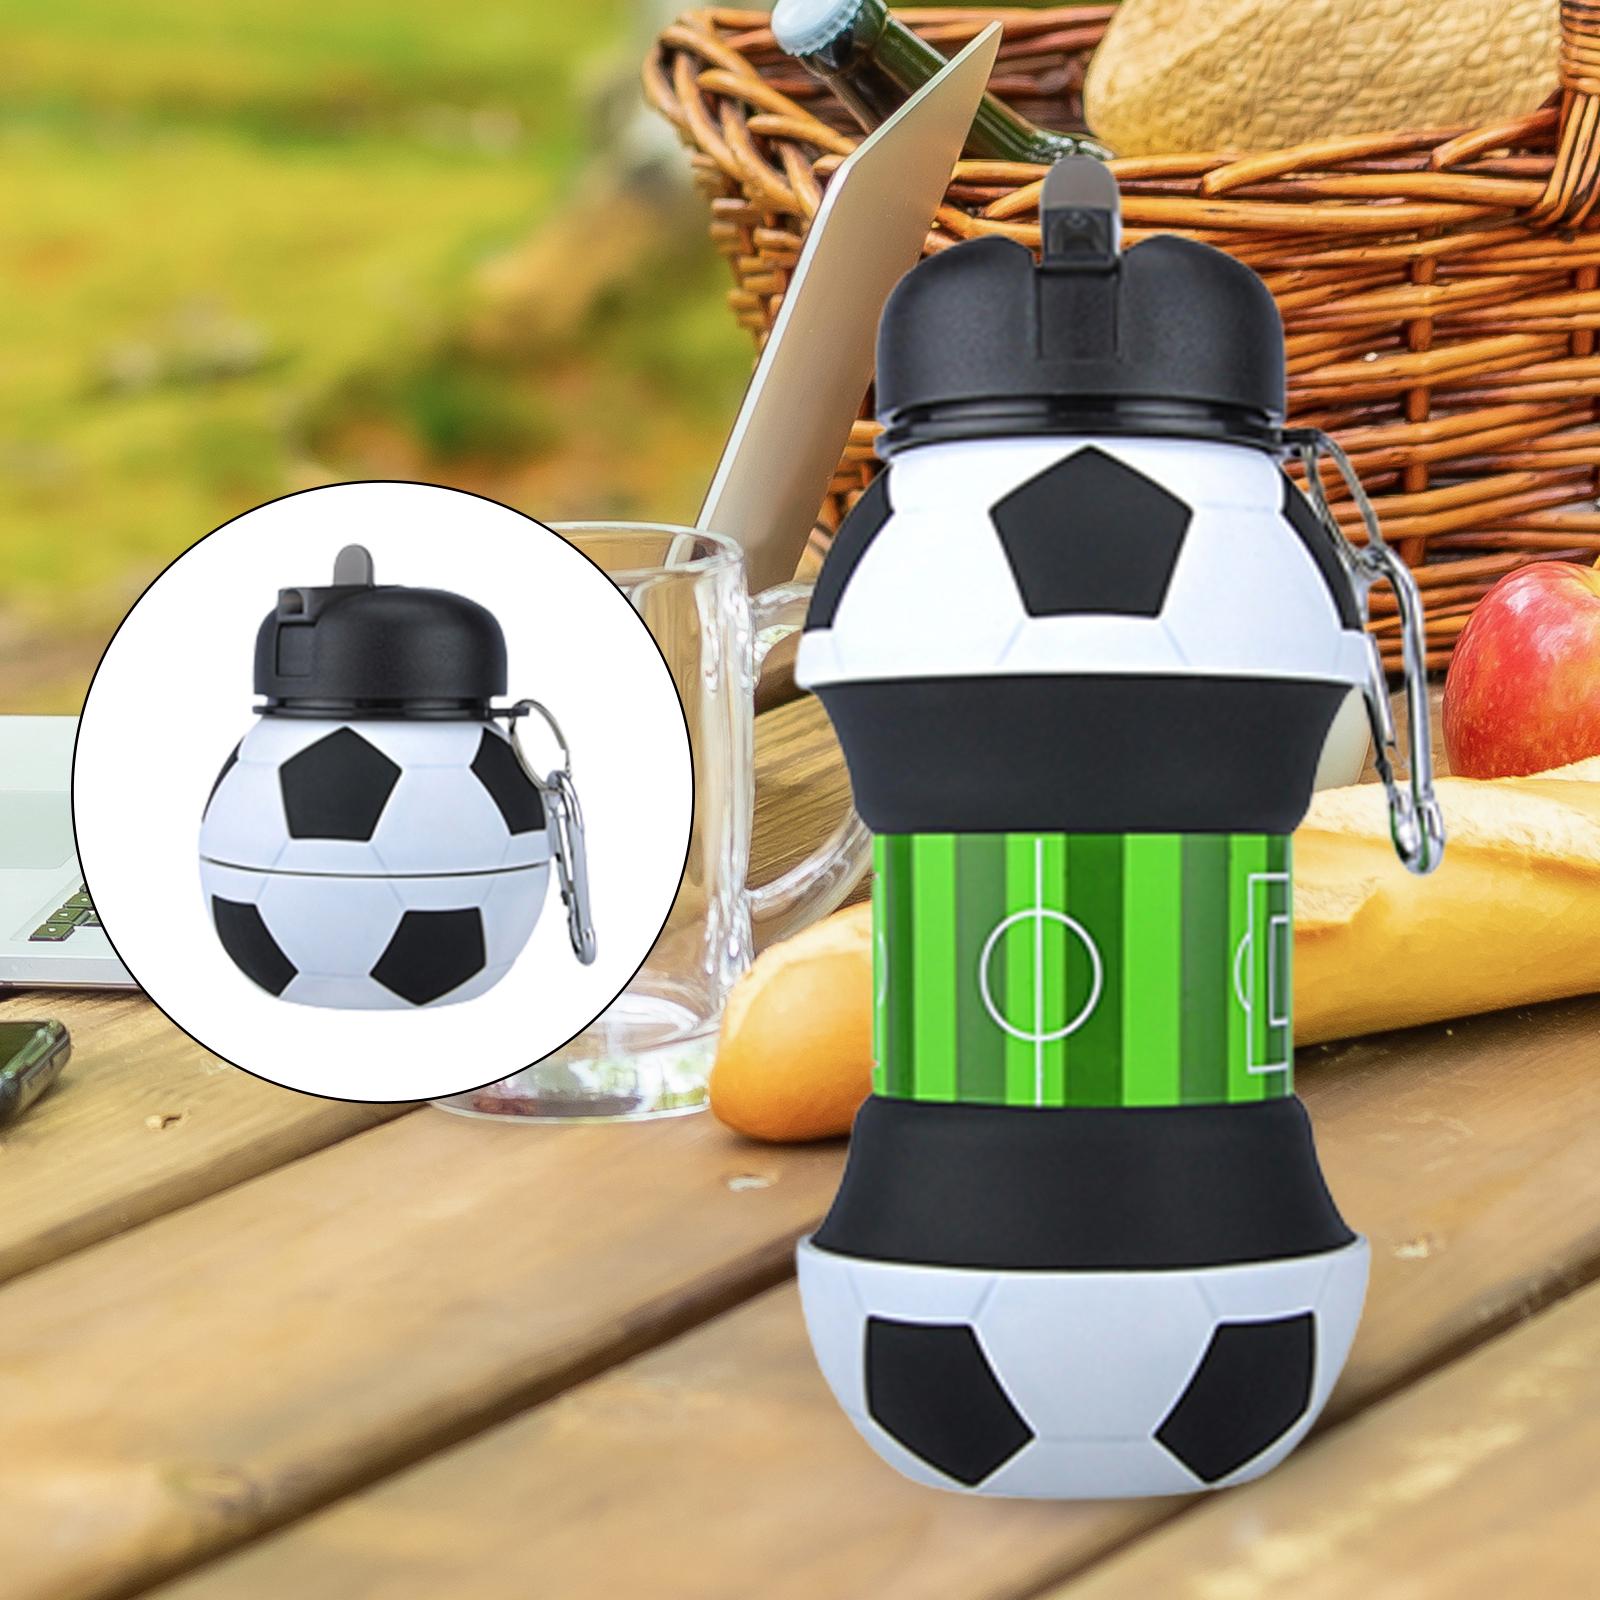 Collapsible Water Bottle Portable Durable Foldable for Outdoor Sports Hiking Football